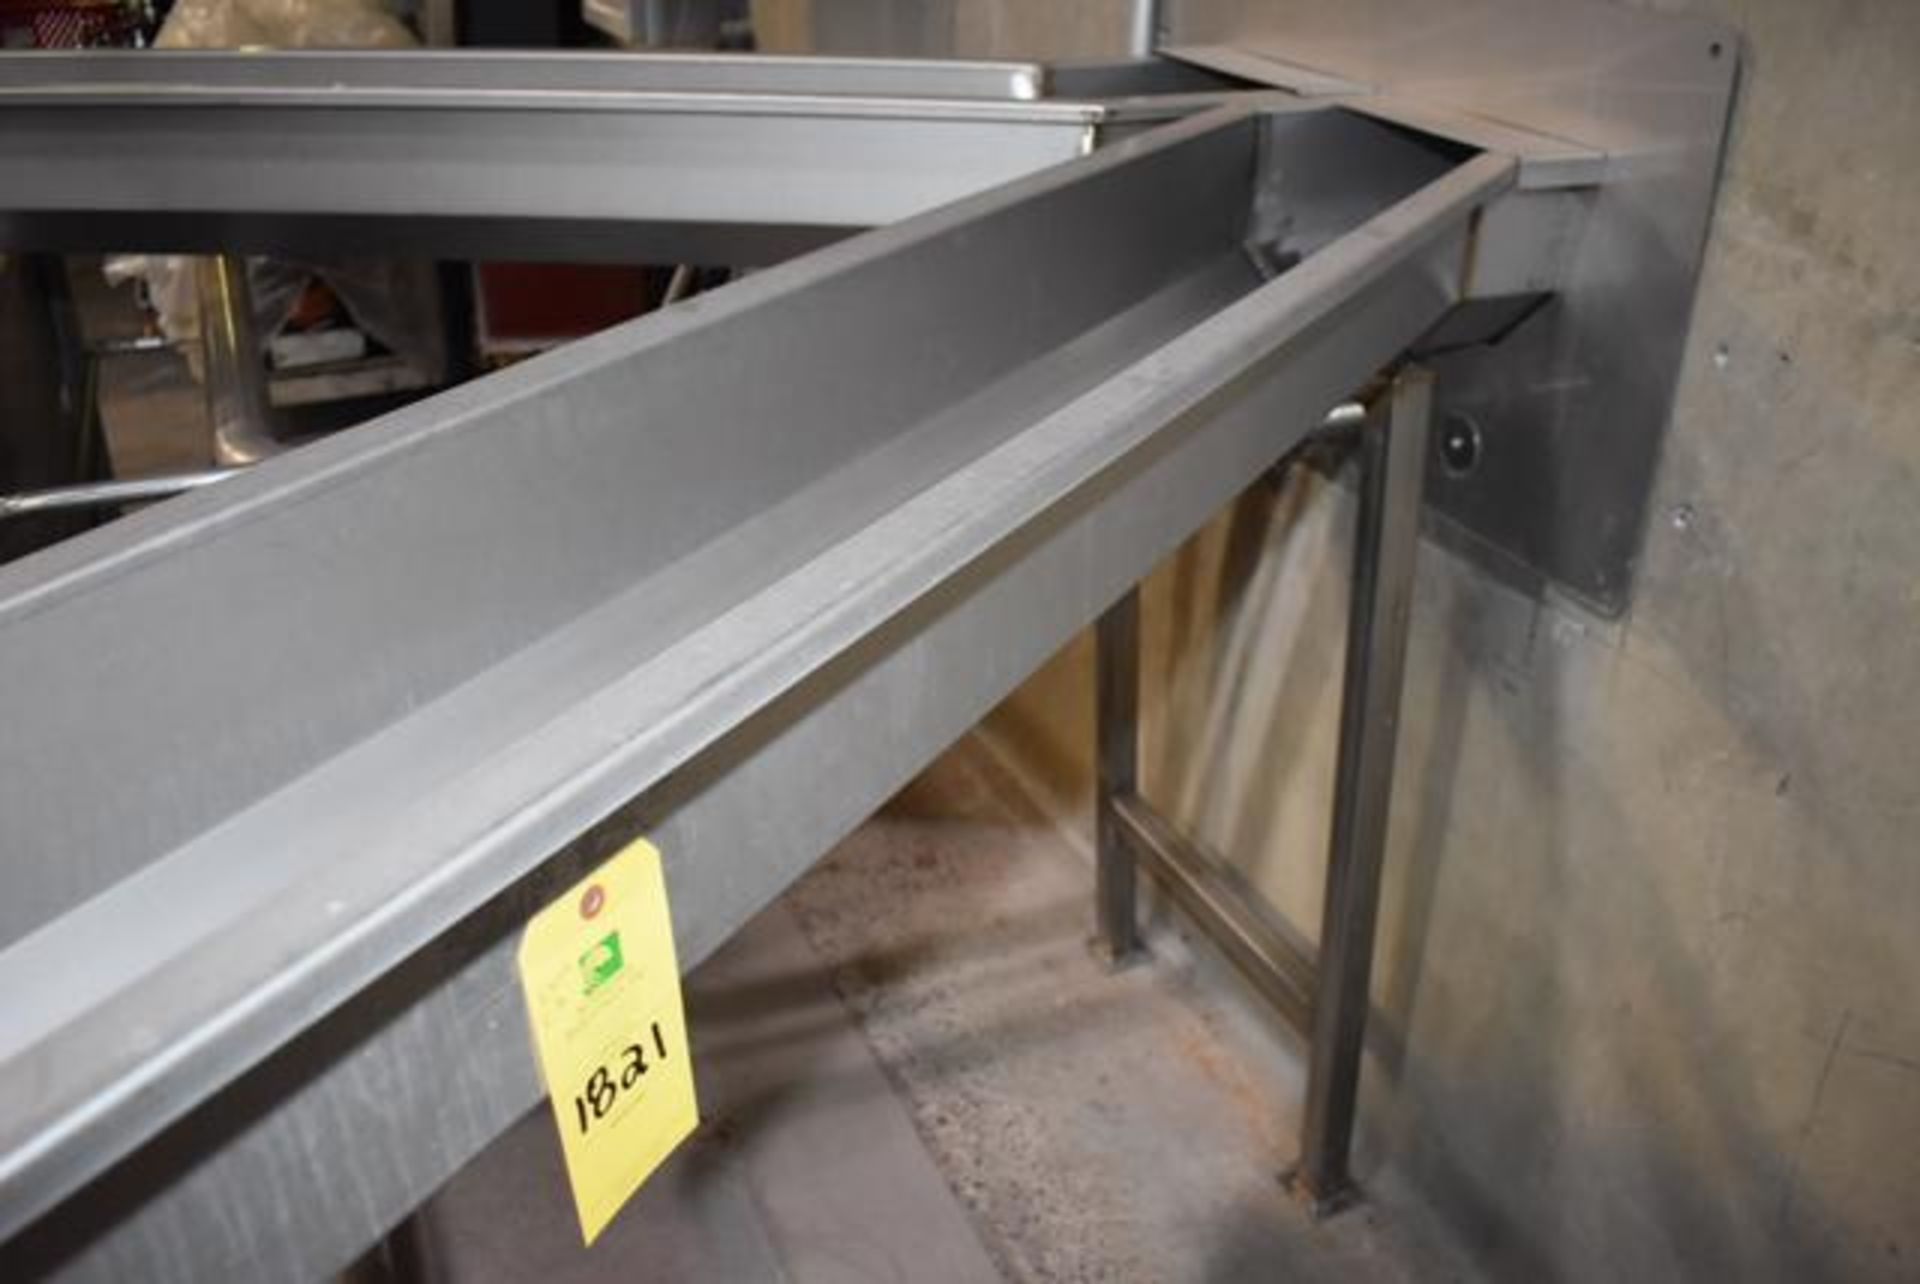 Line #2 - Cherry, Stainless Steel Flume, 12' Top x 5" Bottom x 9" Deep, RIGGING FEE: $300